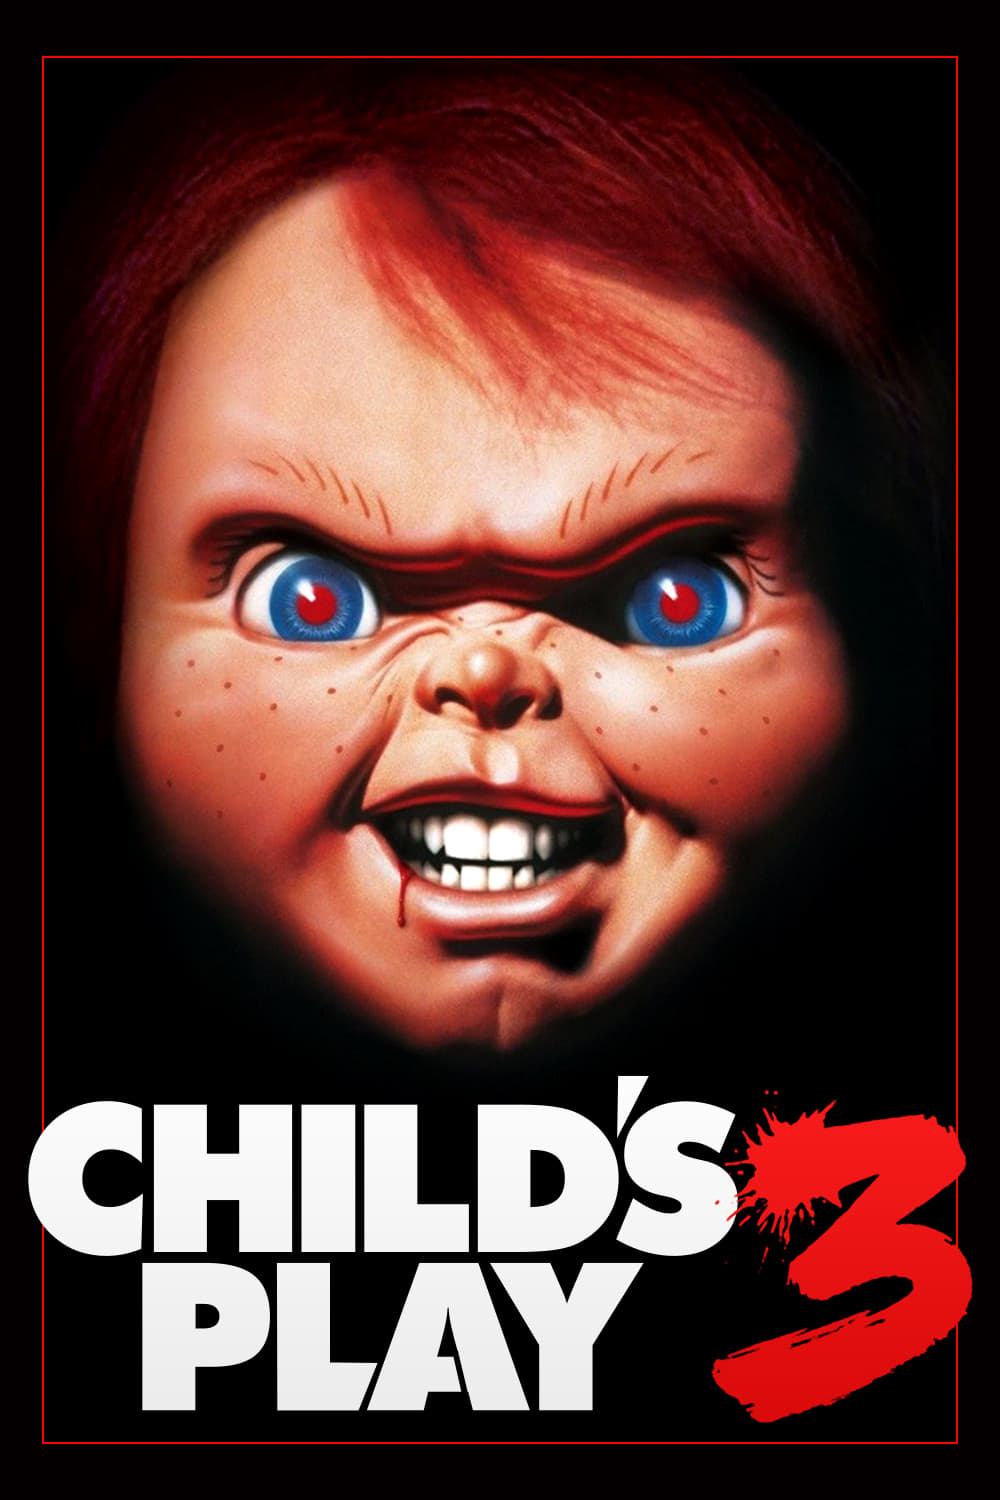 Child's Play 3 (1991) Movie Poster Framed or Unframed Glossy Poster Free UK Shipping!!!